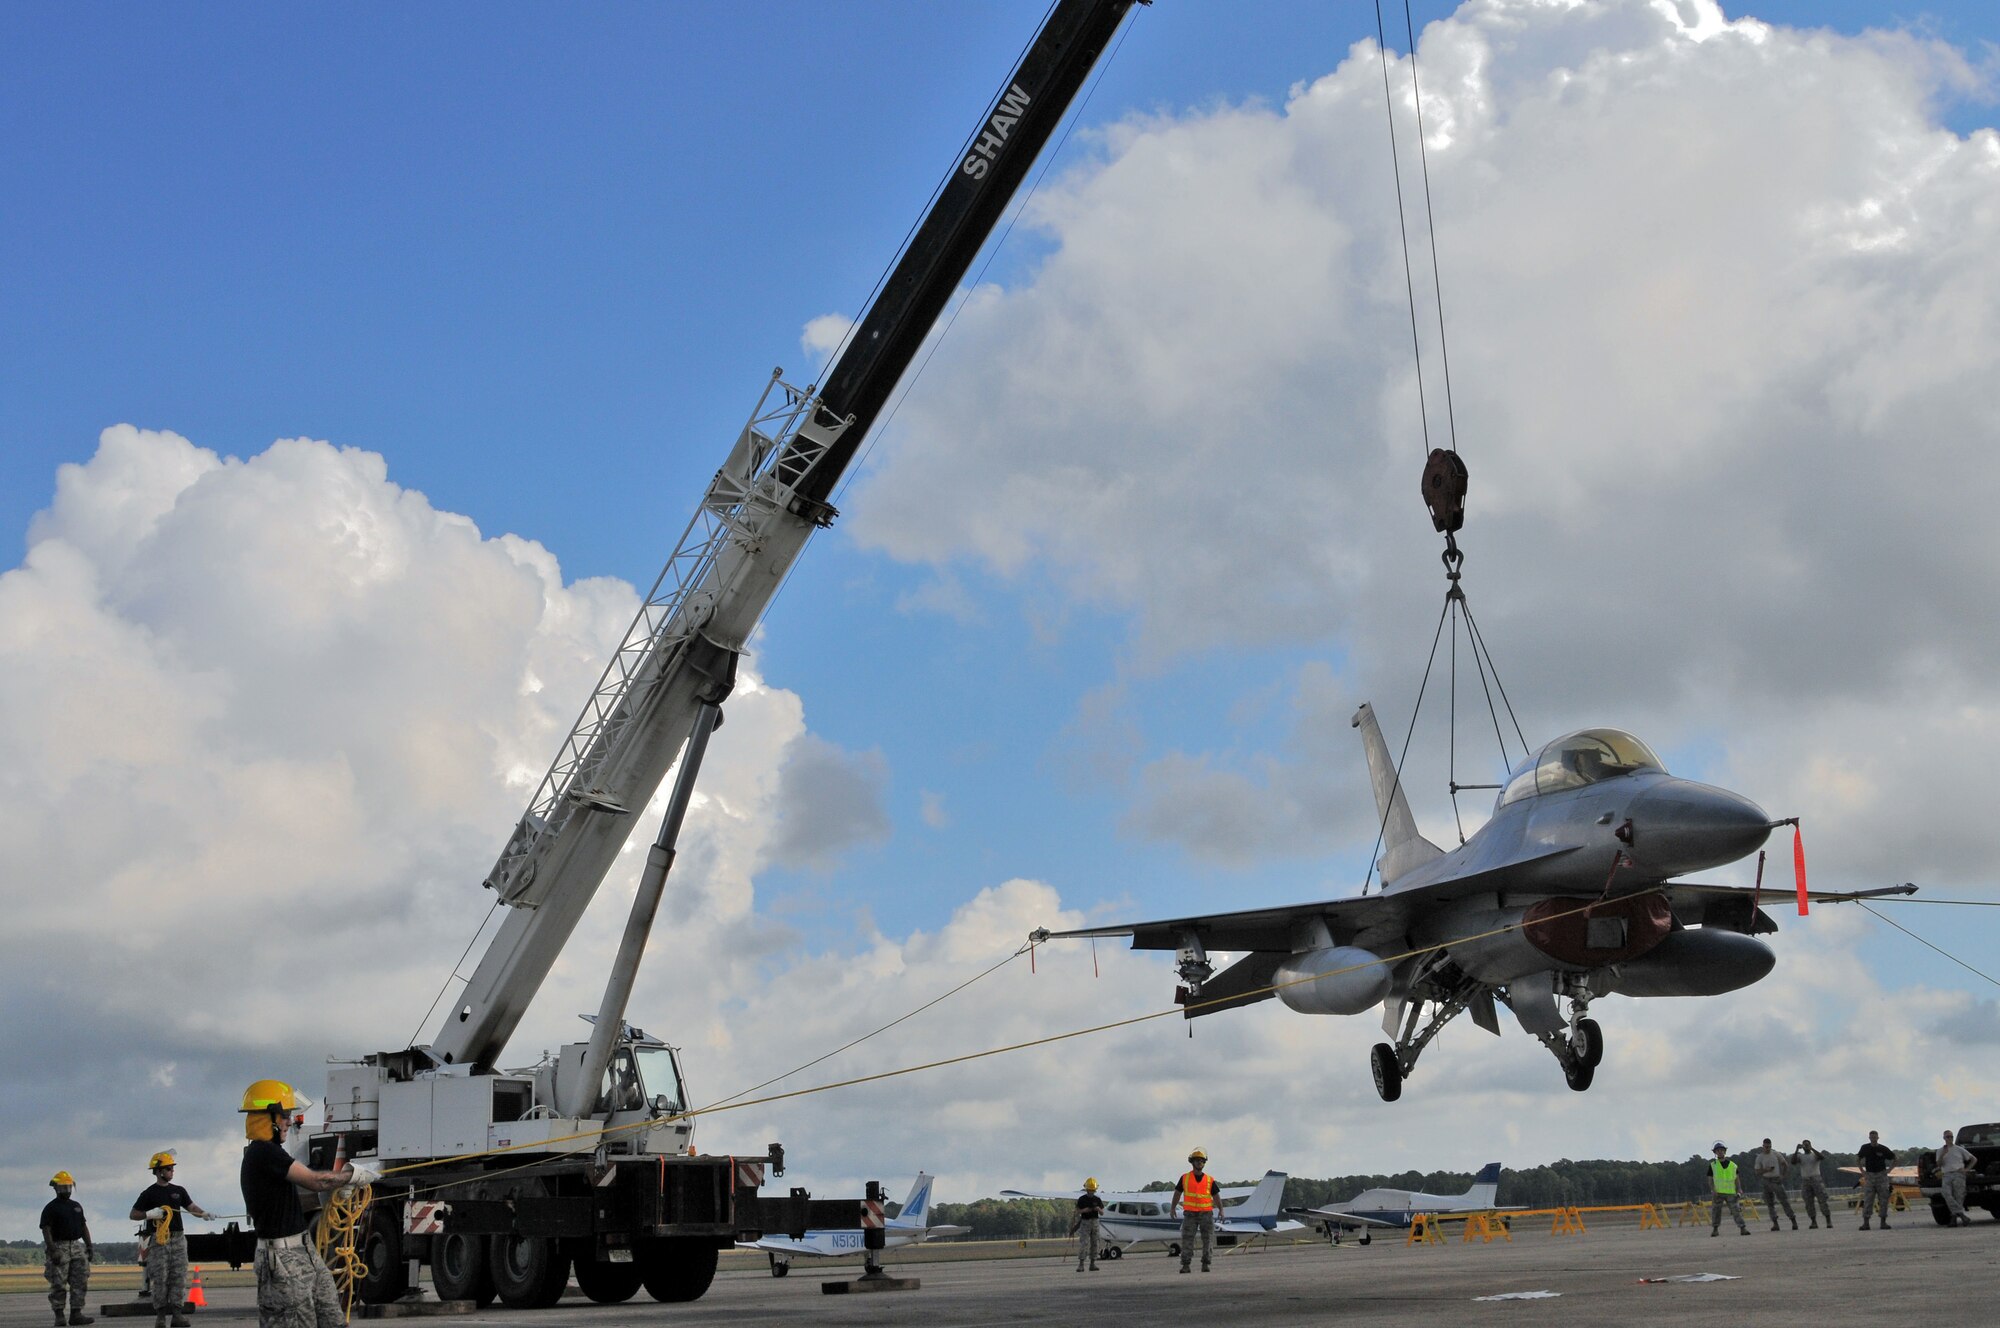 U.S. Air Force airmen from the New Jersey Air National Guard 177th Fighter Wing Crash Disabled Damaged Aircraft Recovery team maneuvering an F-16 Fighting Falcon hooked up to a crane.